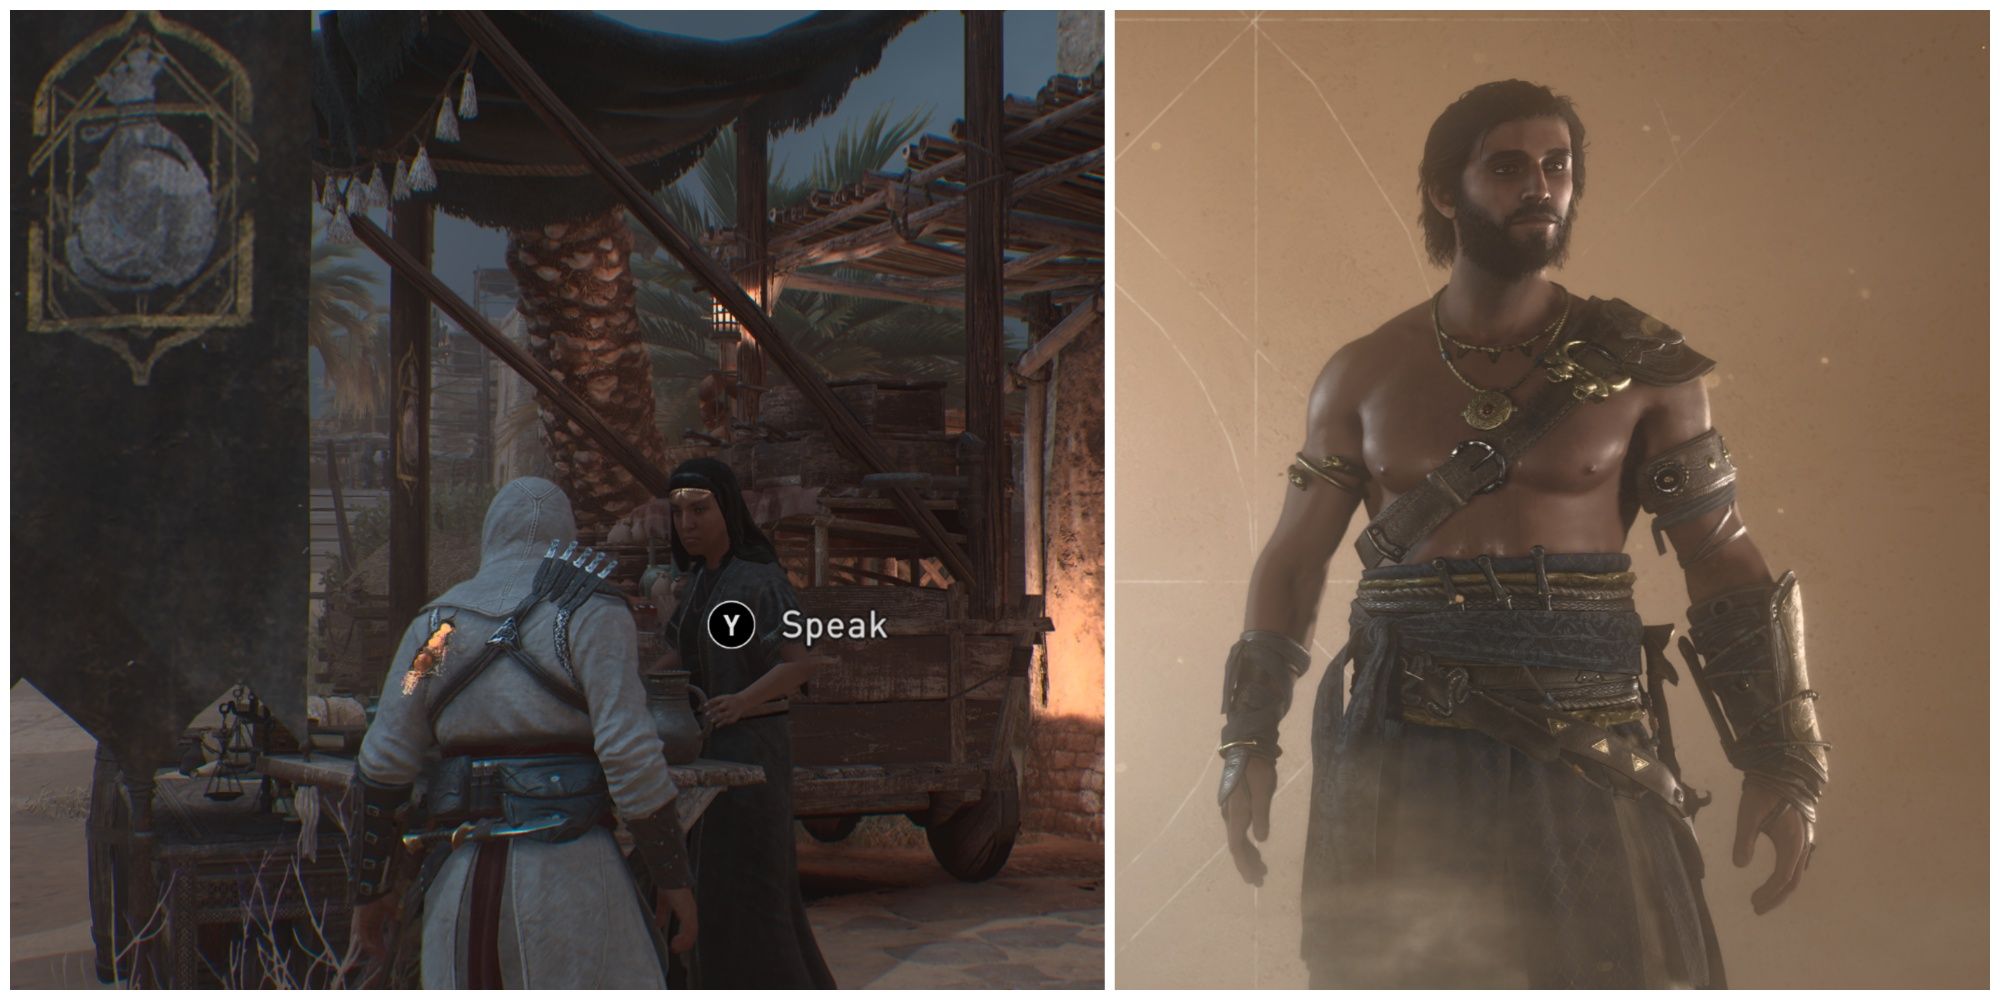 acquiring more outfits at the trader and equipping deluxe pack costume